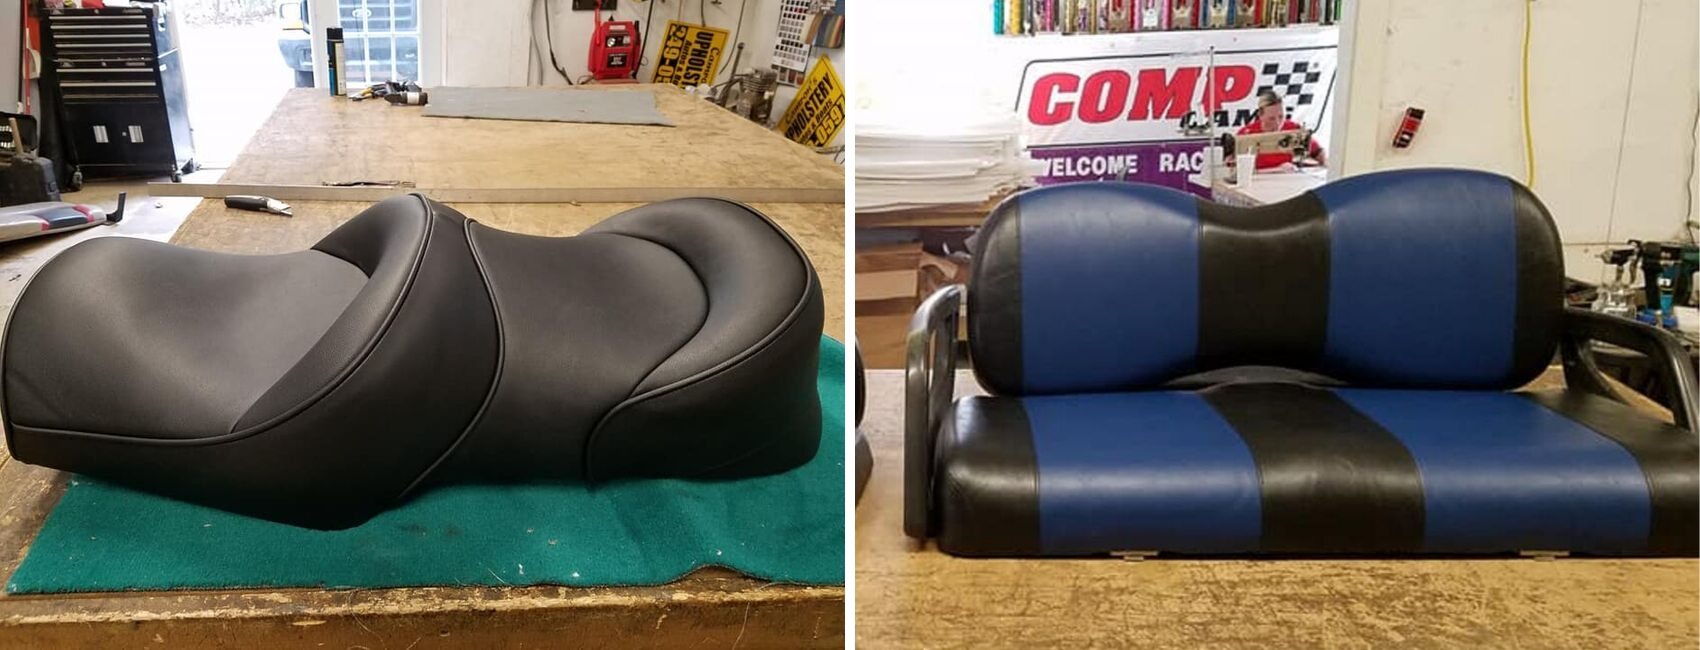 Motorcycle seat and golf cart reupholstery 